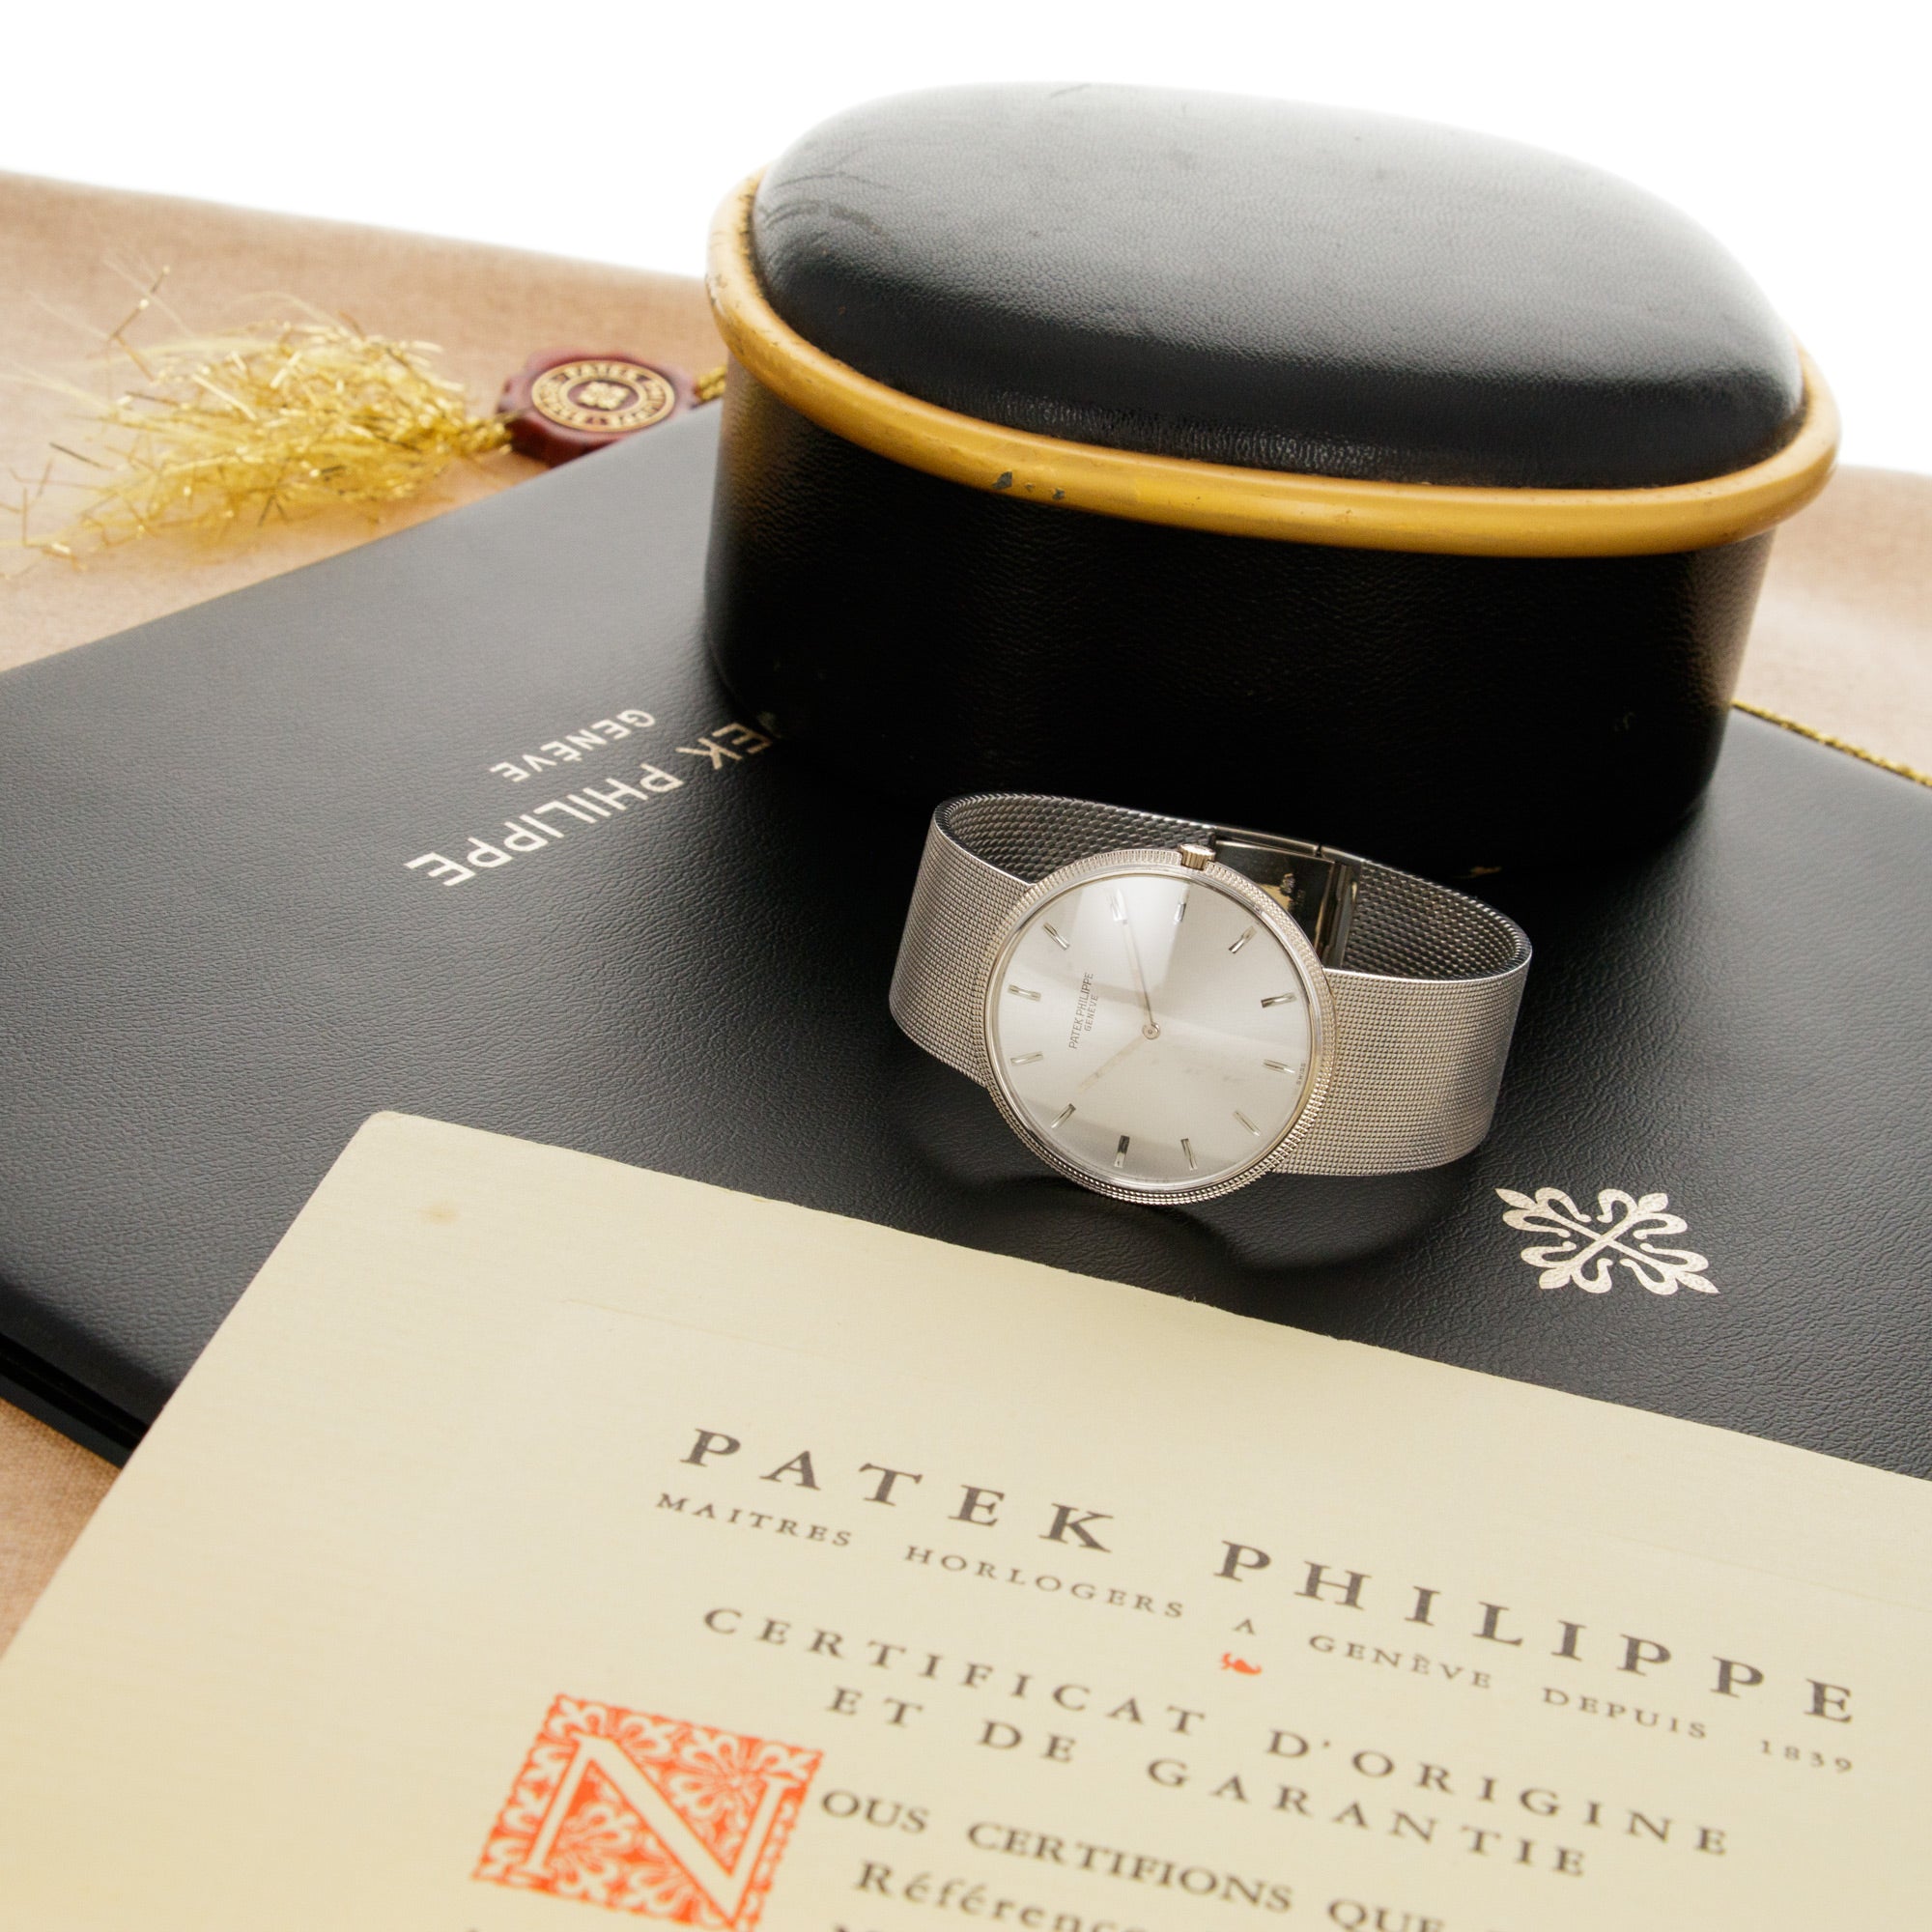 Patek Philippe - Patek Philippe White Gold Calatrava Ref. 3588 with Box and Papers - The Keystone Watches